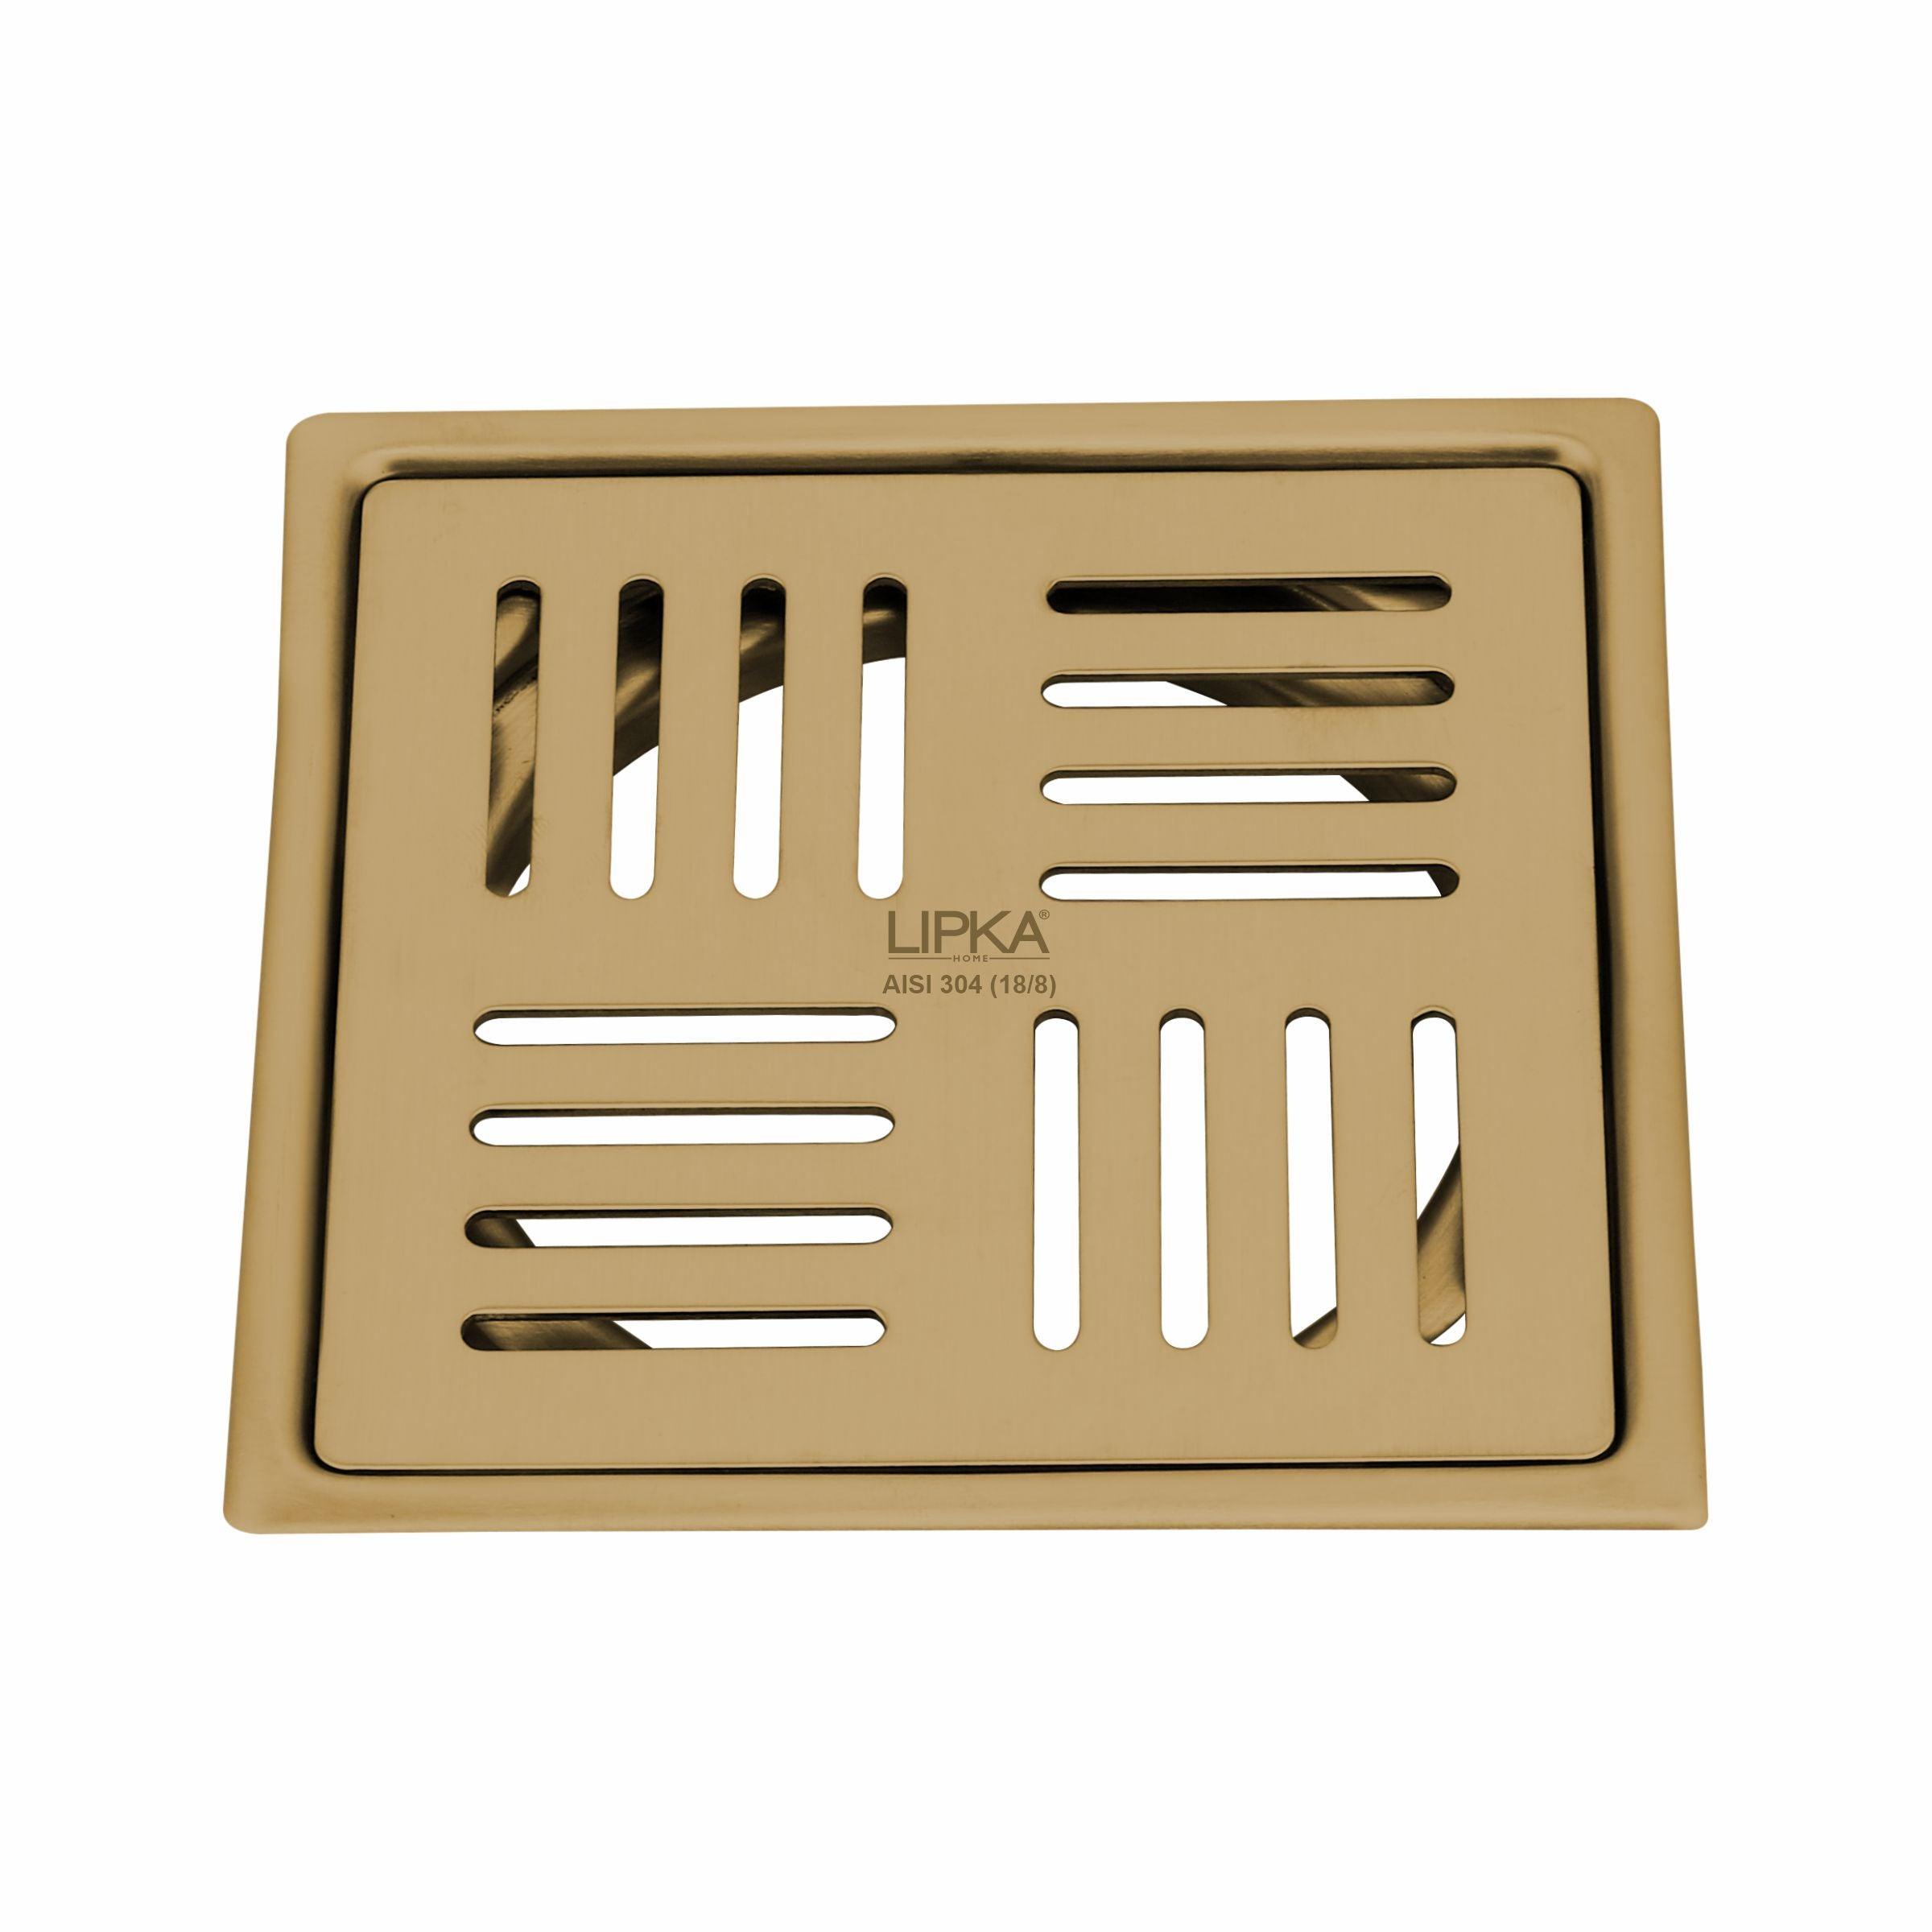 Pink Exclusive Square Flat Cut Floor Drain in Yellow Gold PVD Coating (6 x 6 Inches) - LIPKA